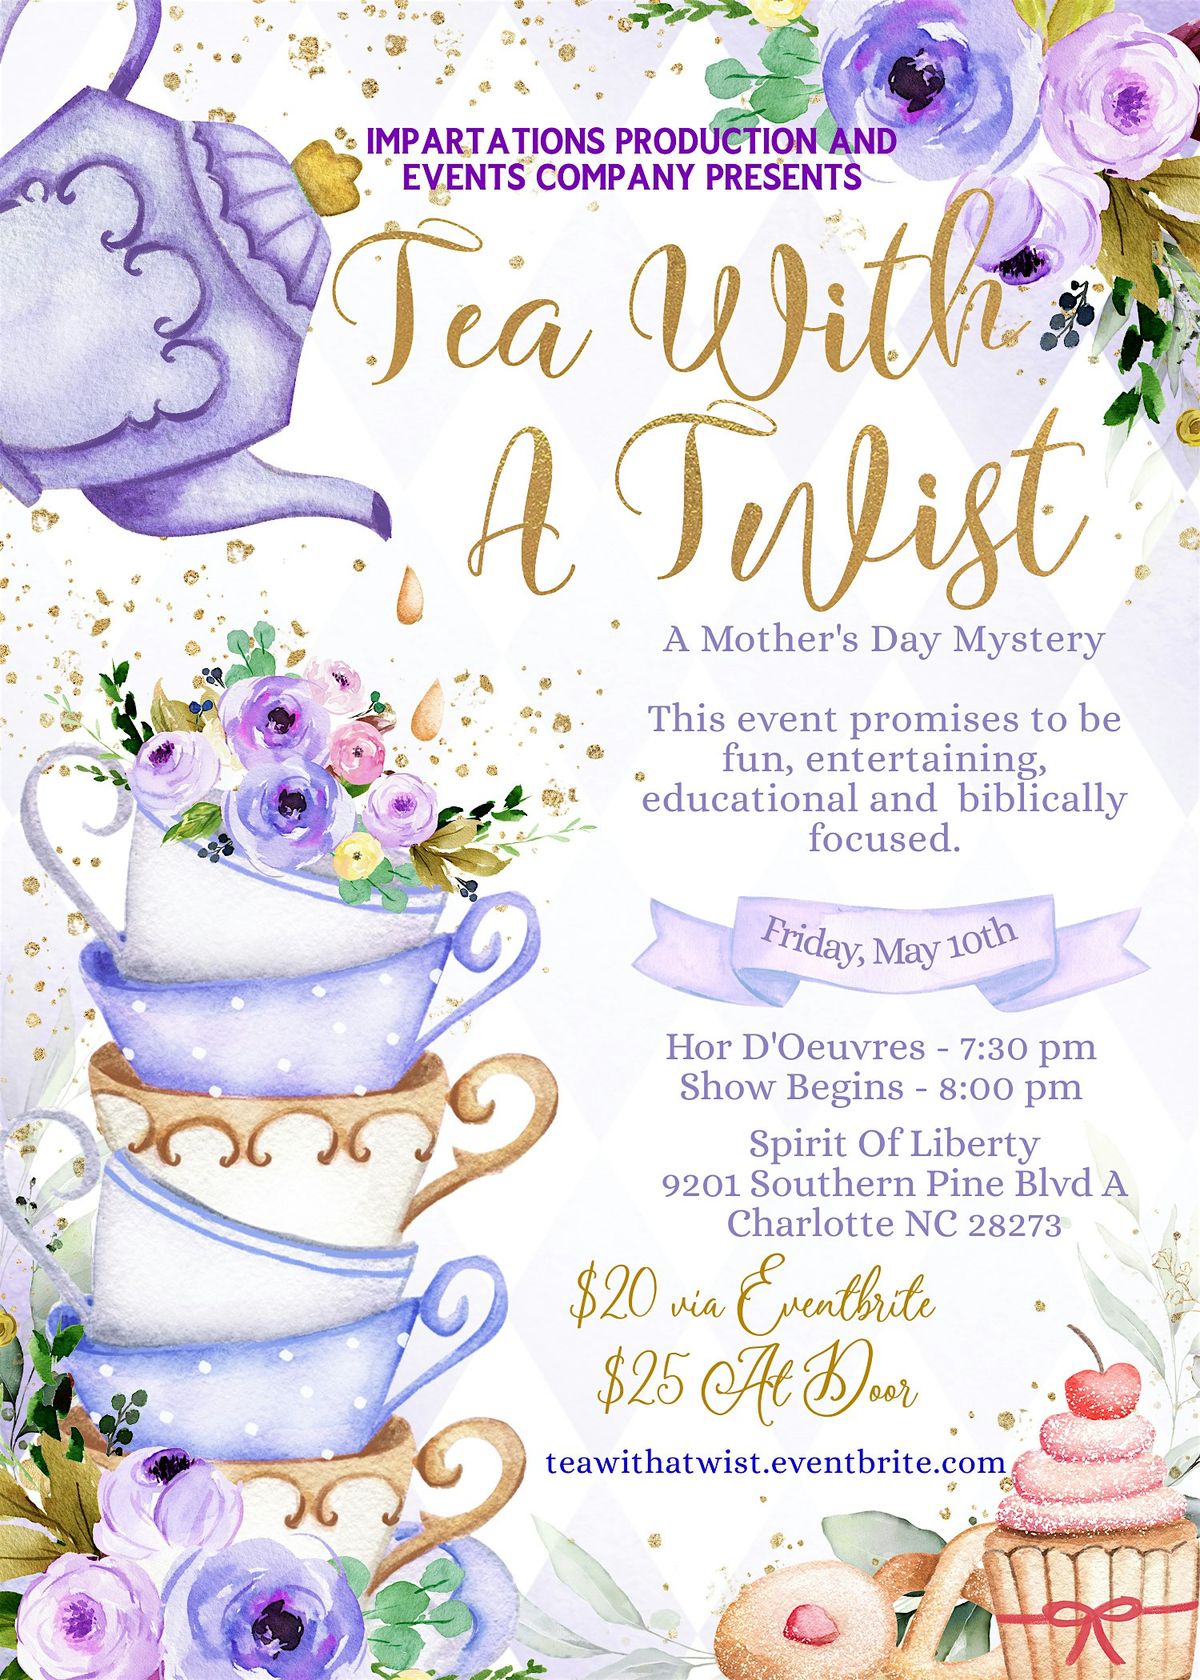 Tea With A Twist - A Mother's Day Mystery